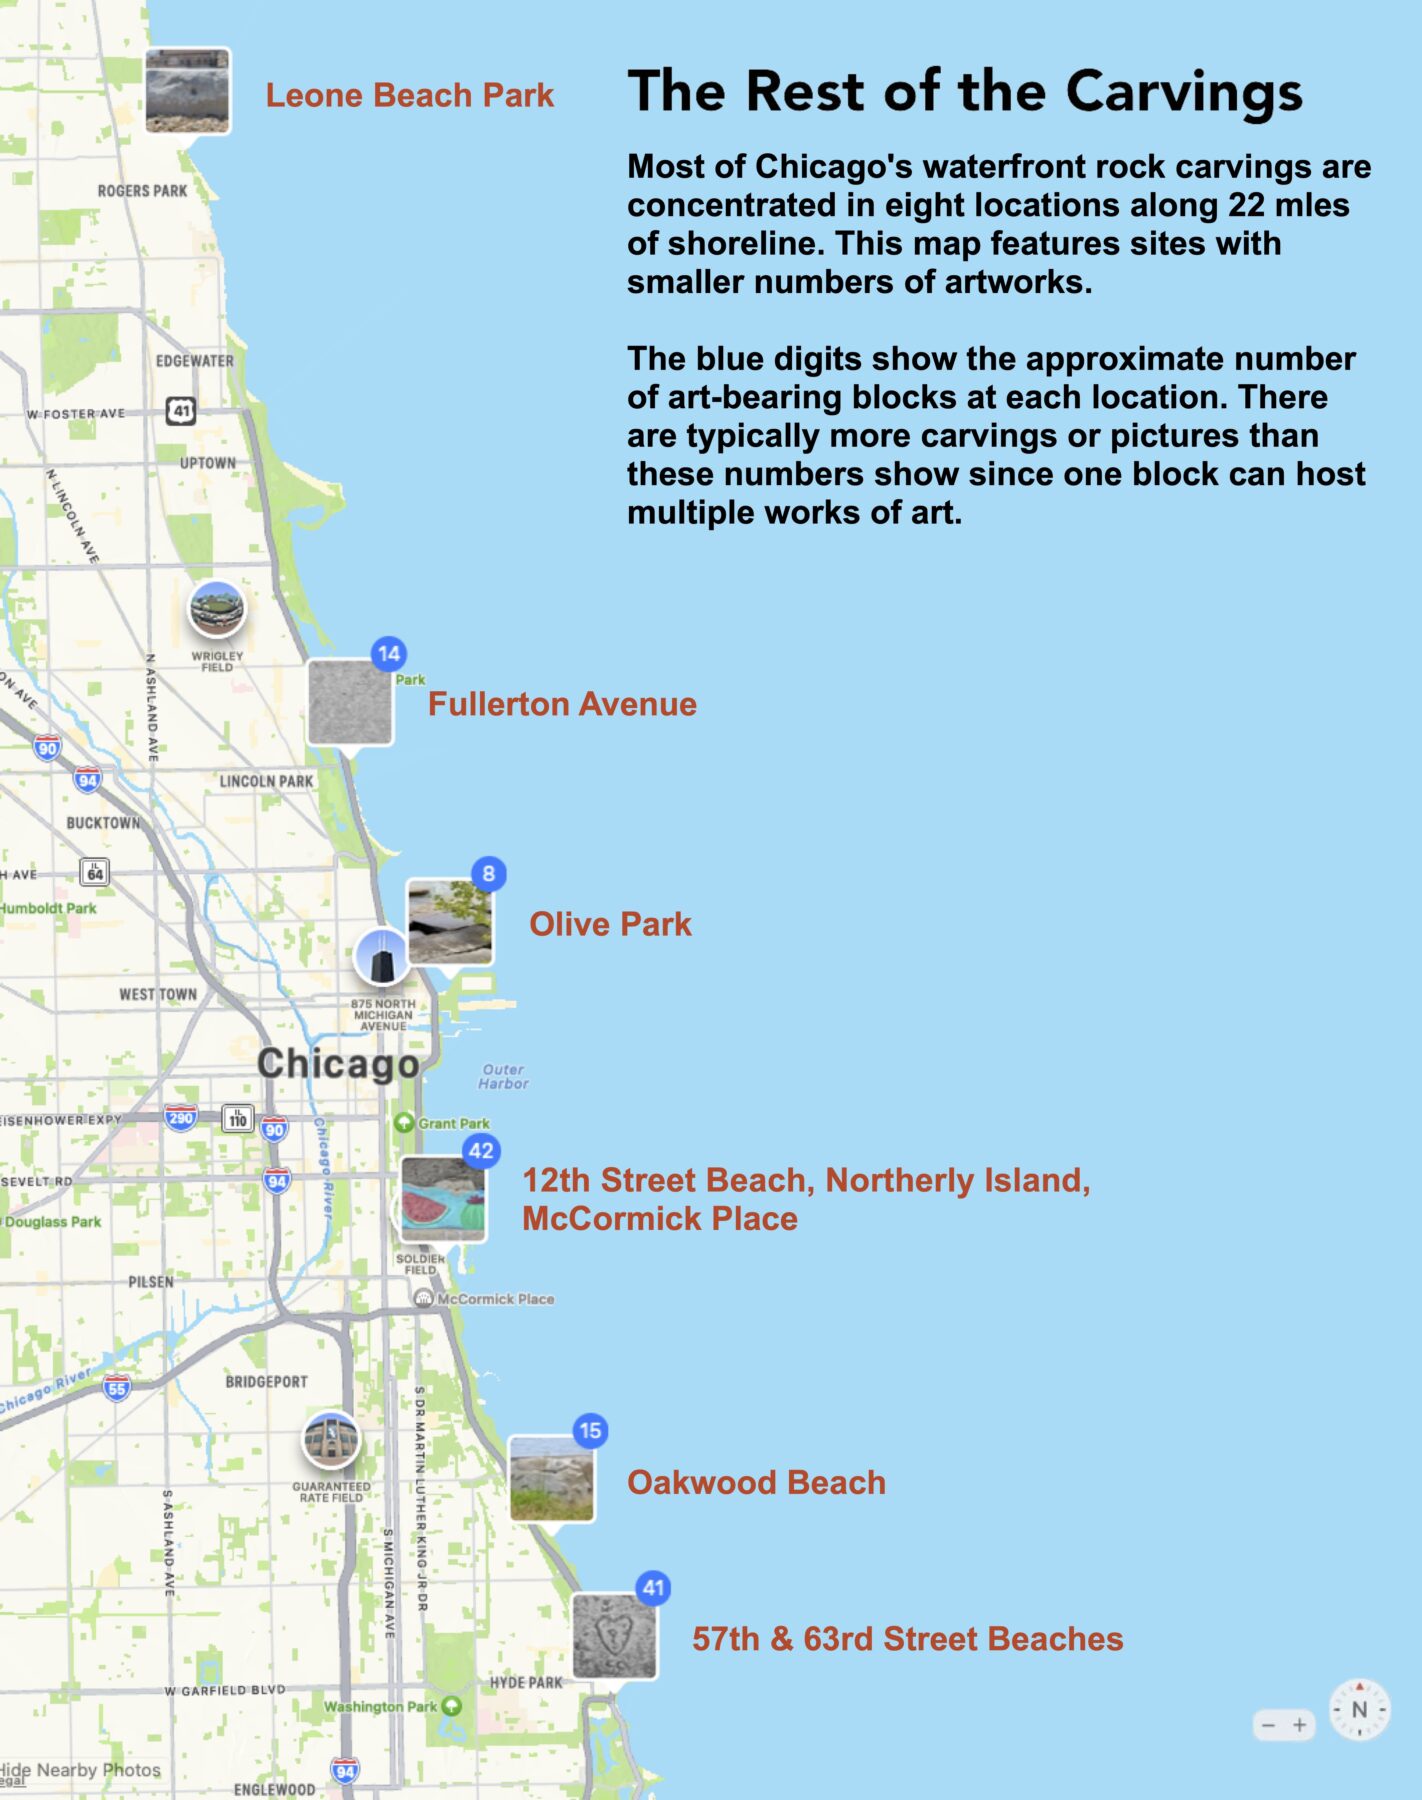 Map showing other locations of Chicago lakefront rock carvings